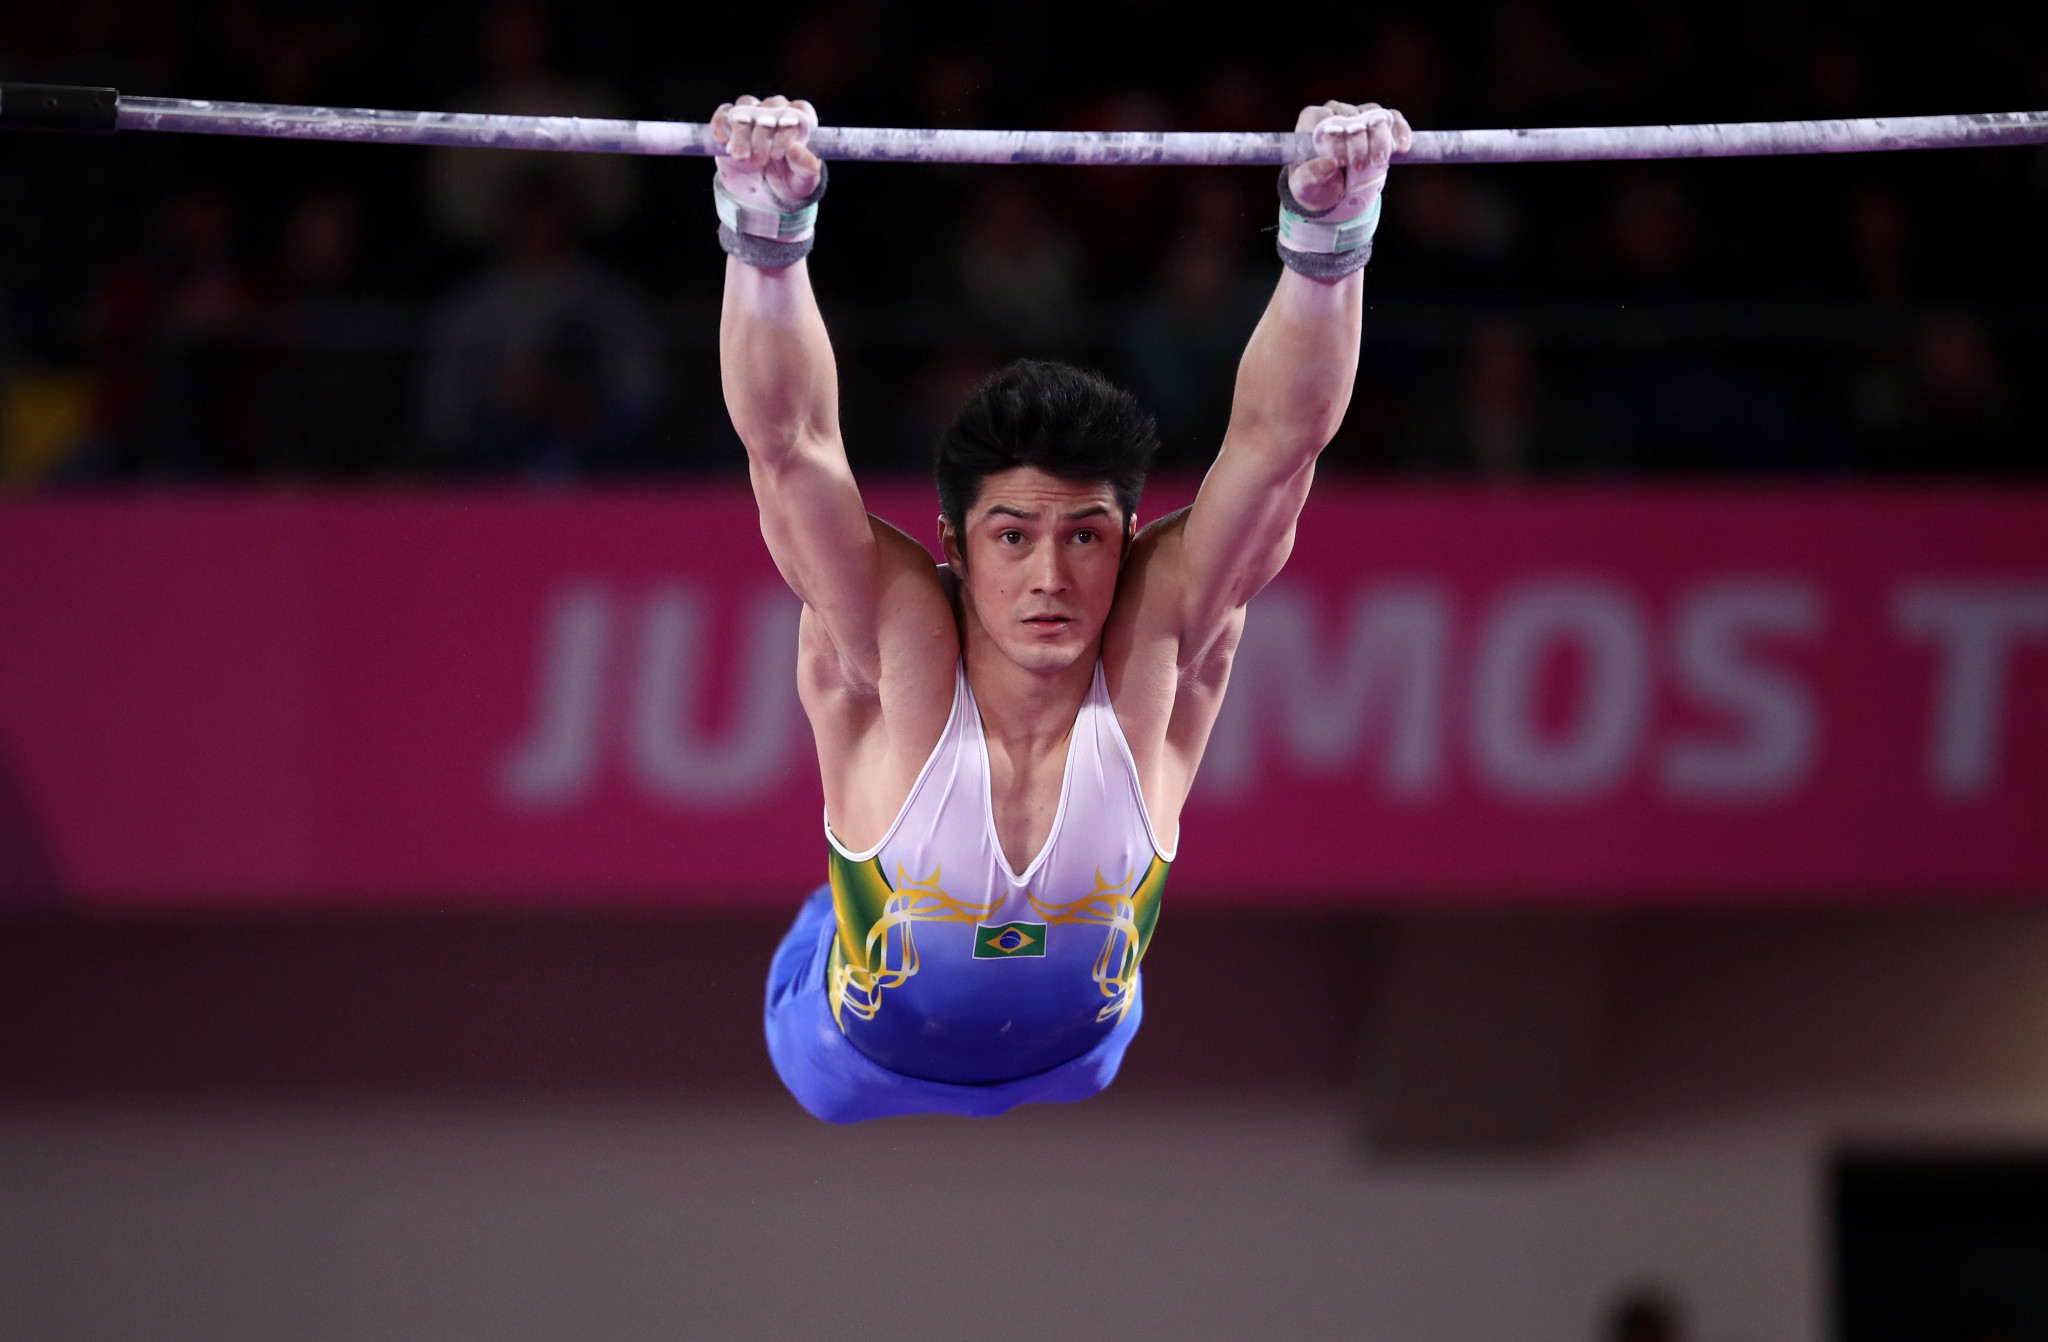 Brazilian gymnast Nory expresses gratitude after he is reunited with Lima 2019 medals 